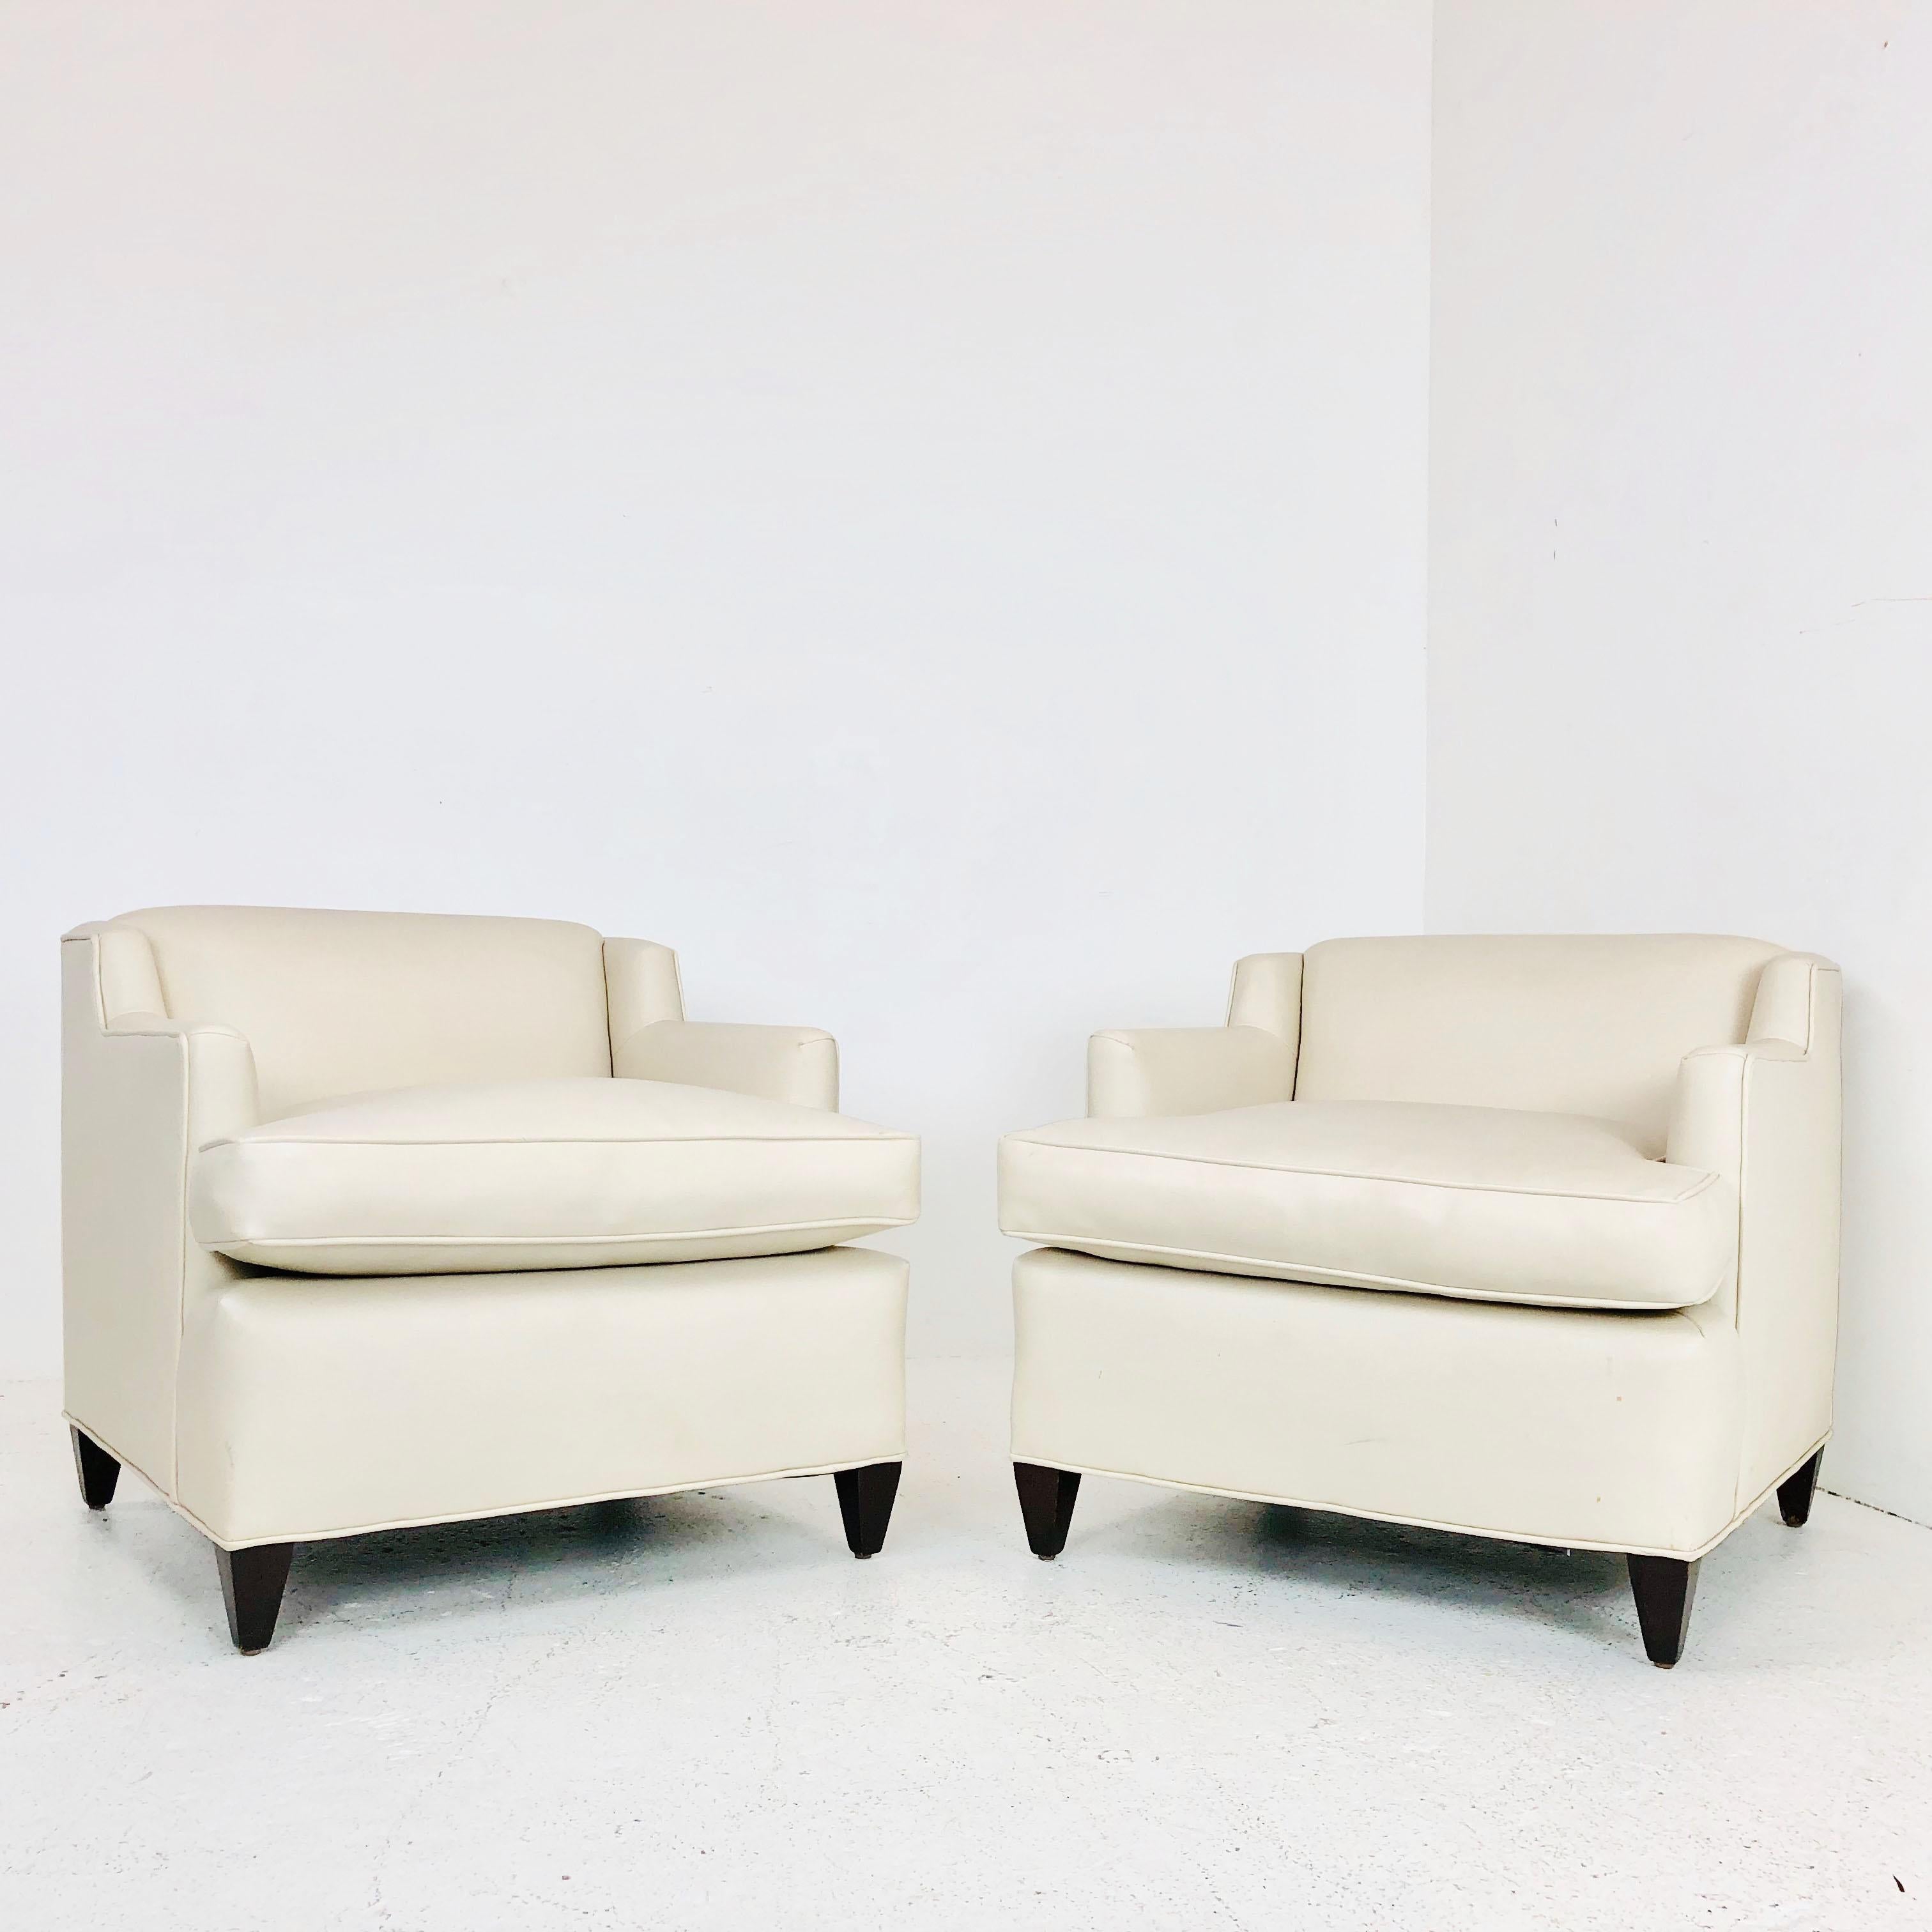 Pair of midcentury Vinyl lounge chairs. These chairs are in good condition and show some wear from use and age. Chairs can be used as-is but recommend new upholstery. 

Dimension:
29 W x 33 D x 28 T
seat height 19.